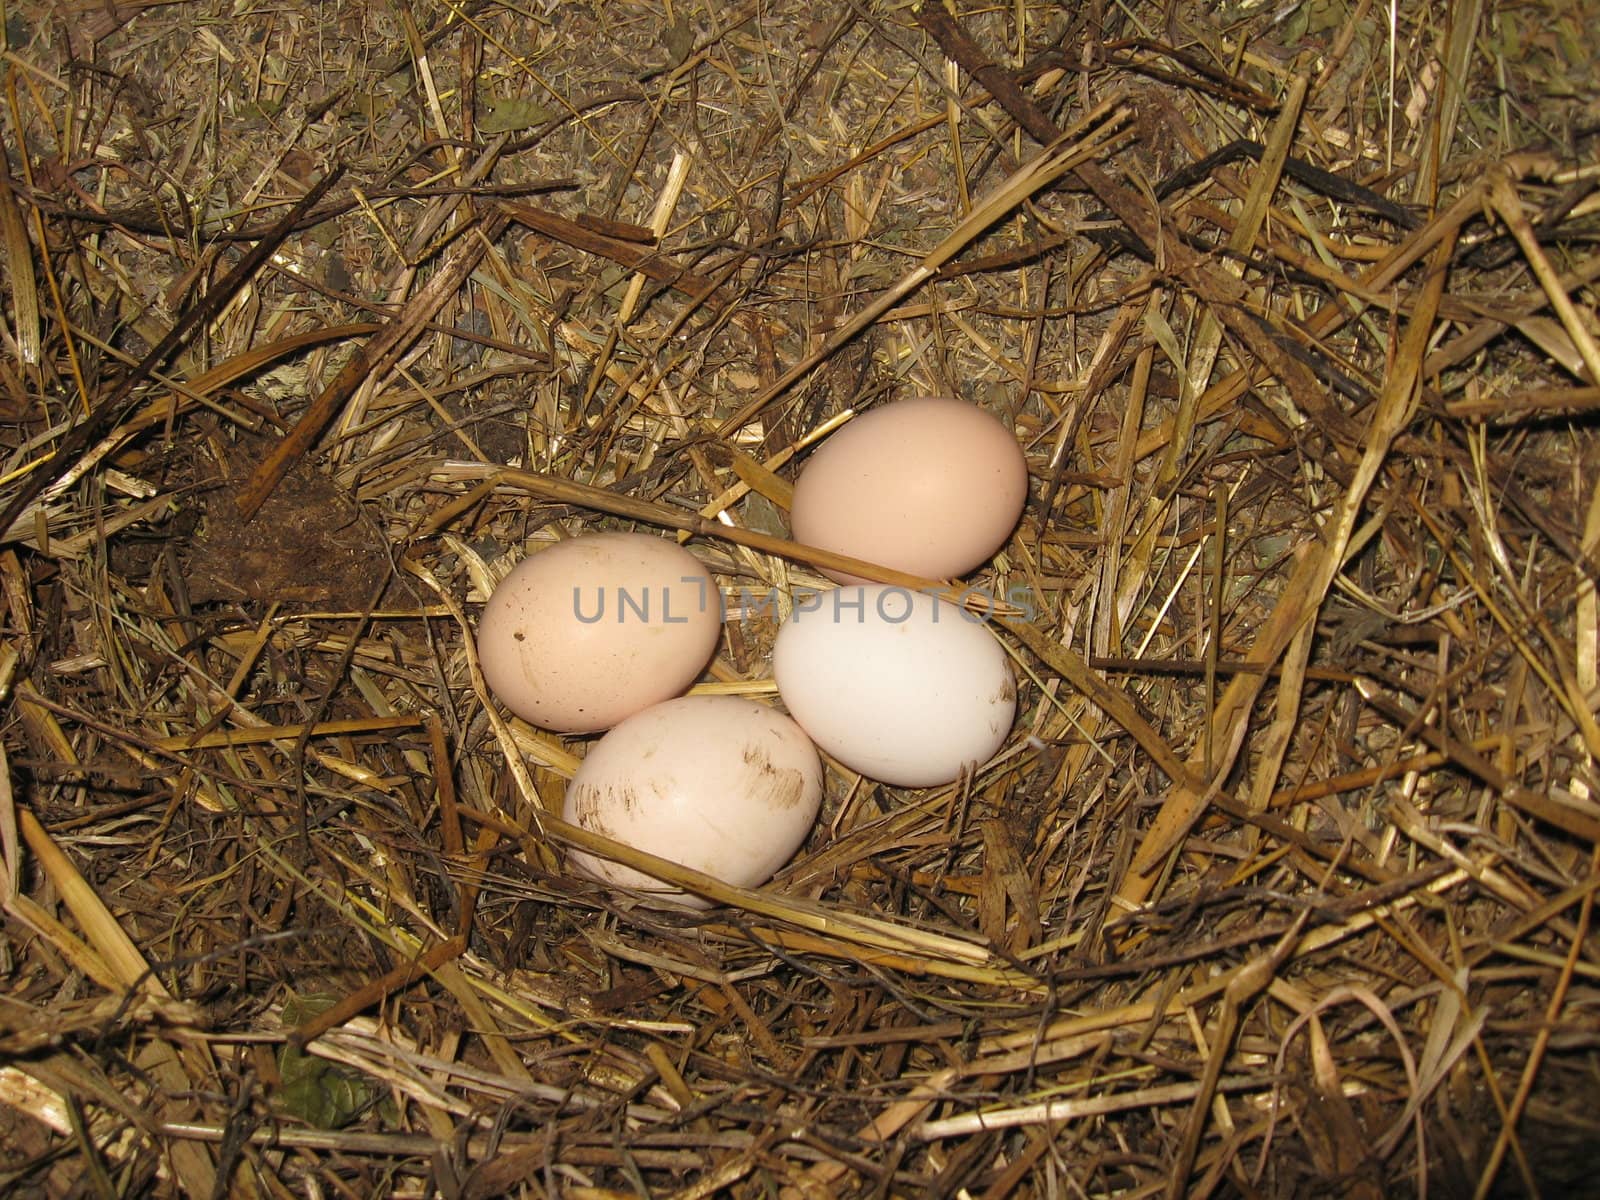 Nest of the hen with eggs by alexmak